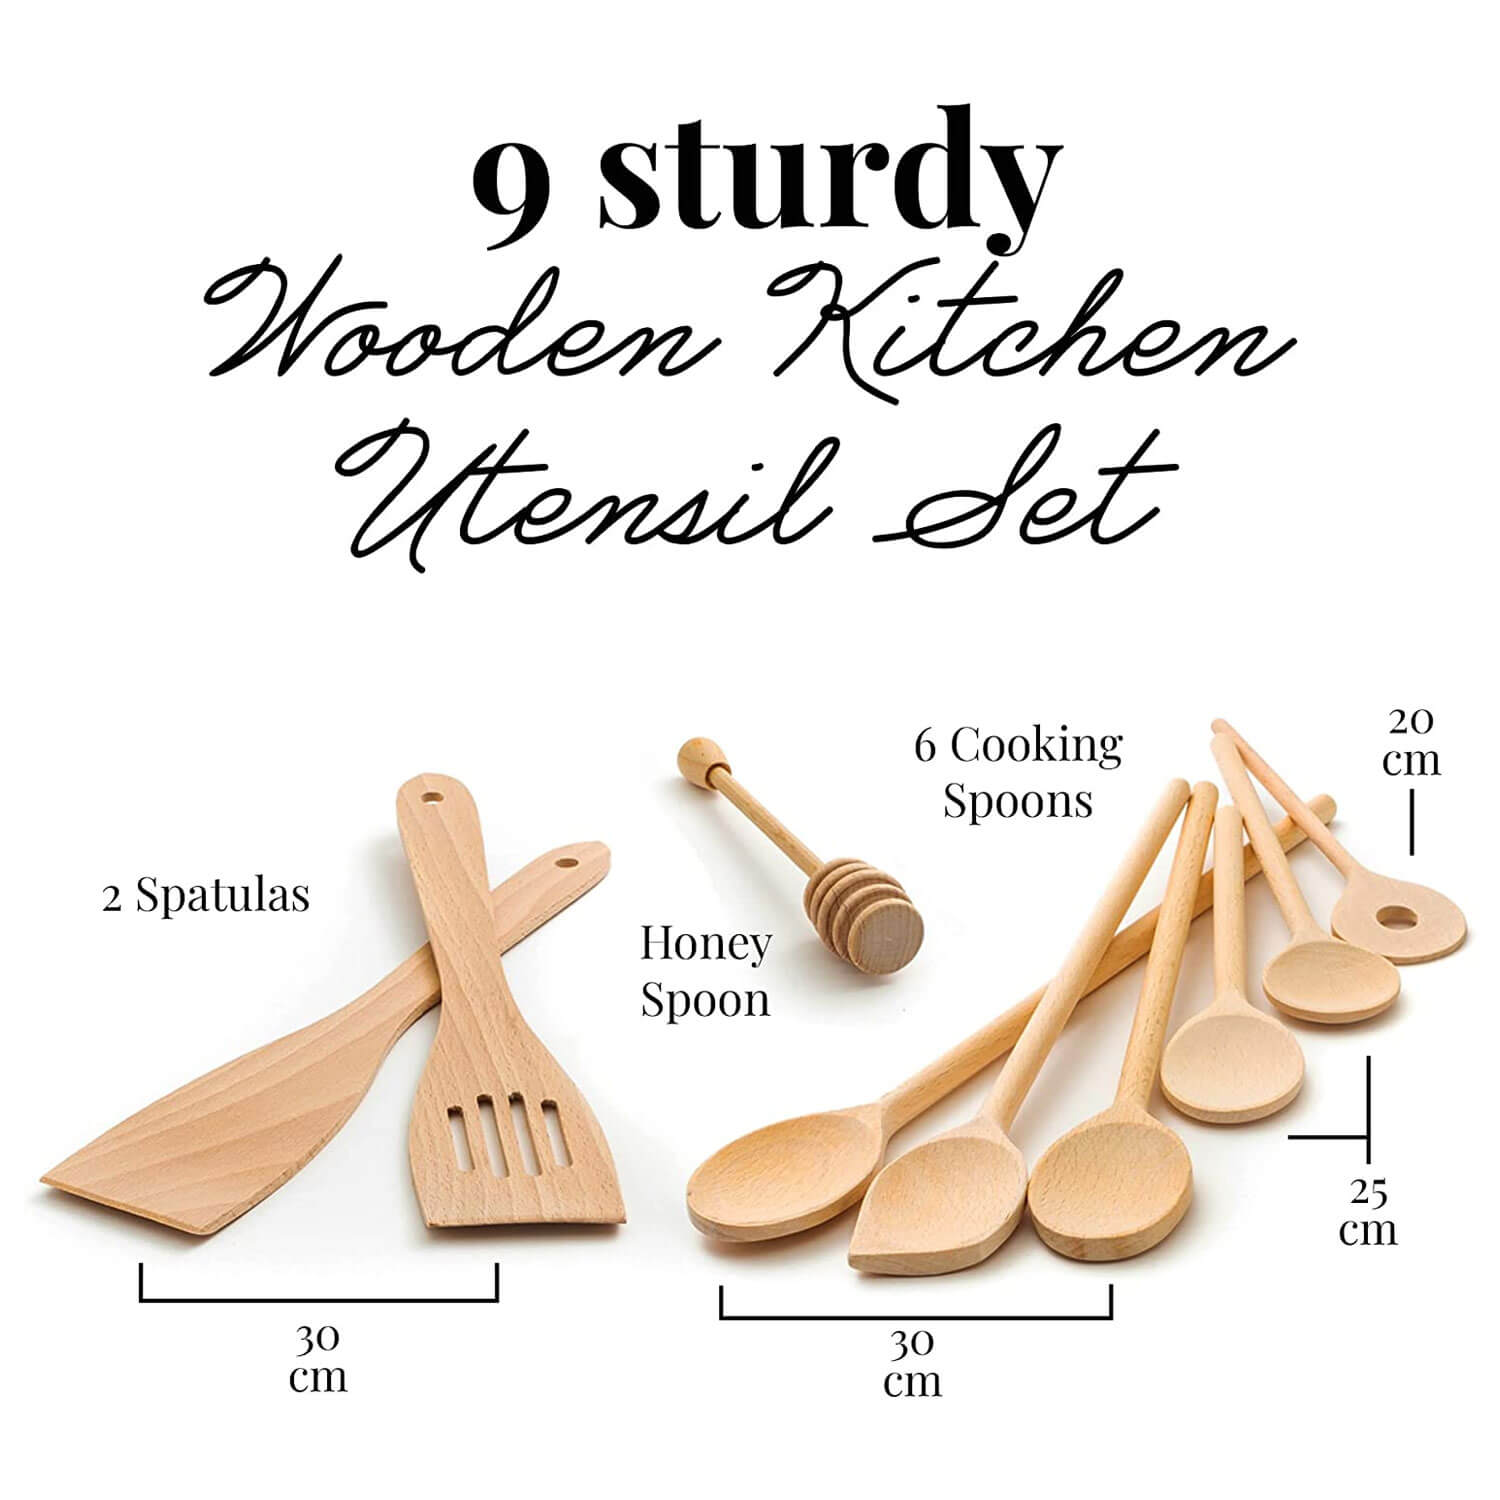 https://cdn.shopify.com/s/files/1/0515/2440/3381/products/9-piece-wooden-kitchen-utensil-set-cooking-spoons-spatulas-honey-spoon-tuuli-974.jpg